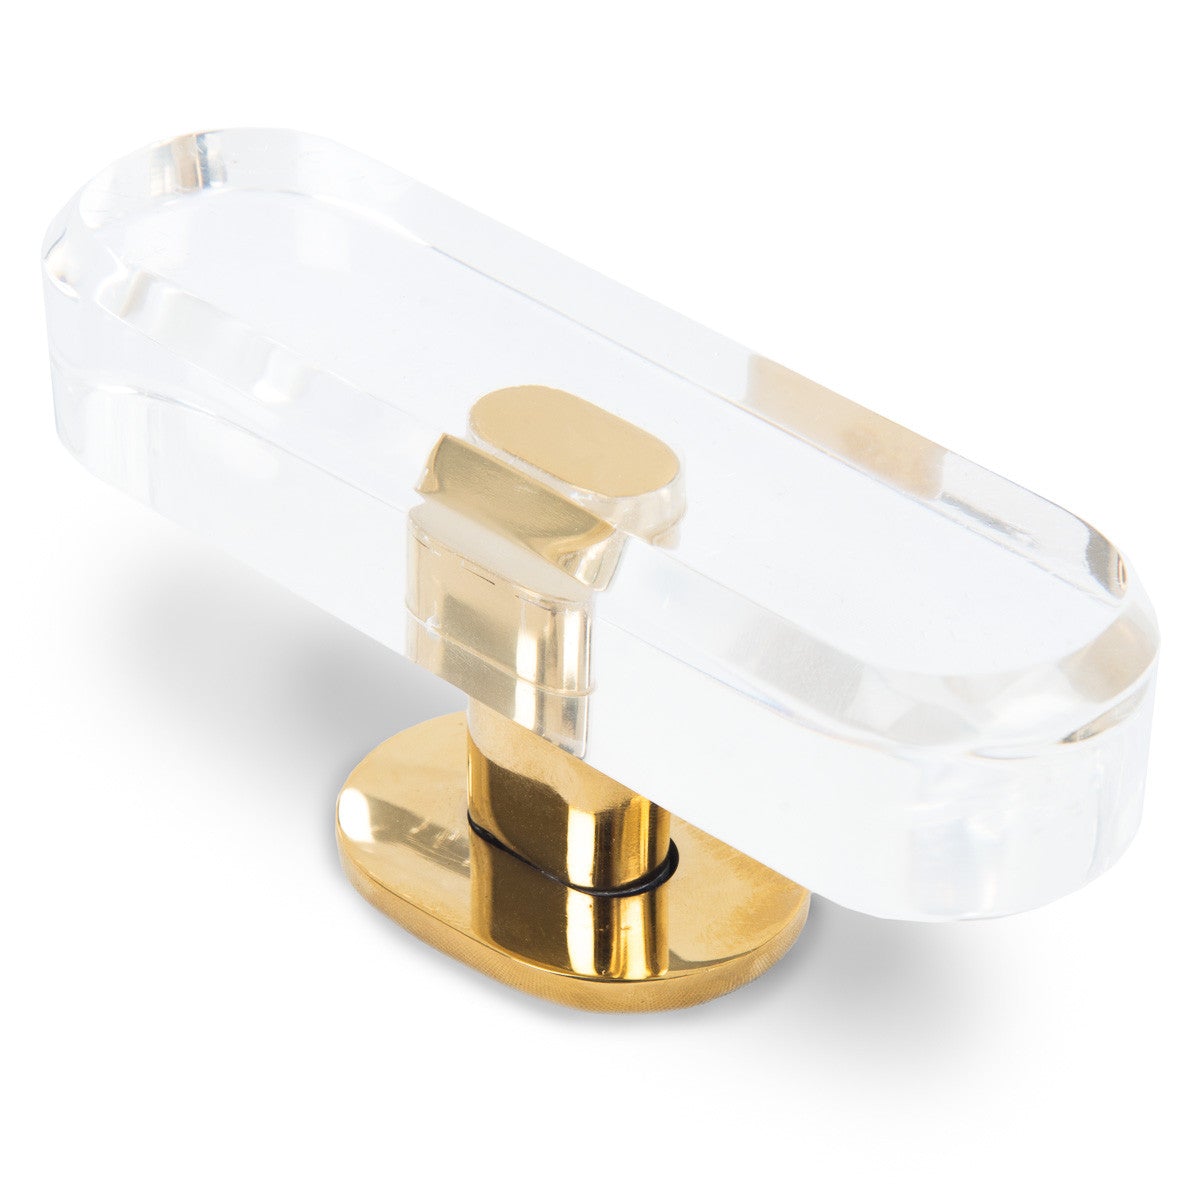 Polished brass and Lucite oval drawer pull or cabinet knob.